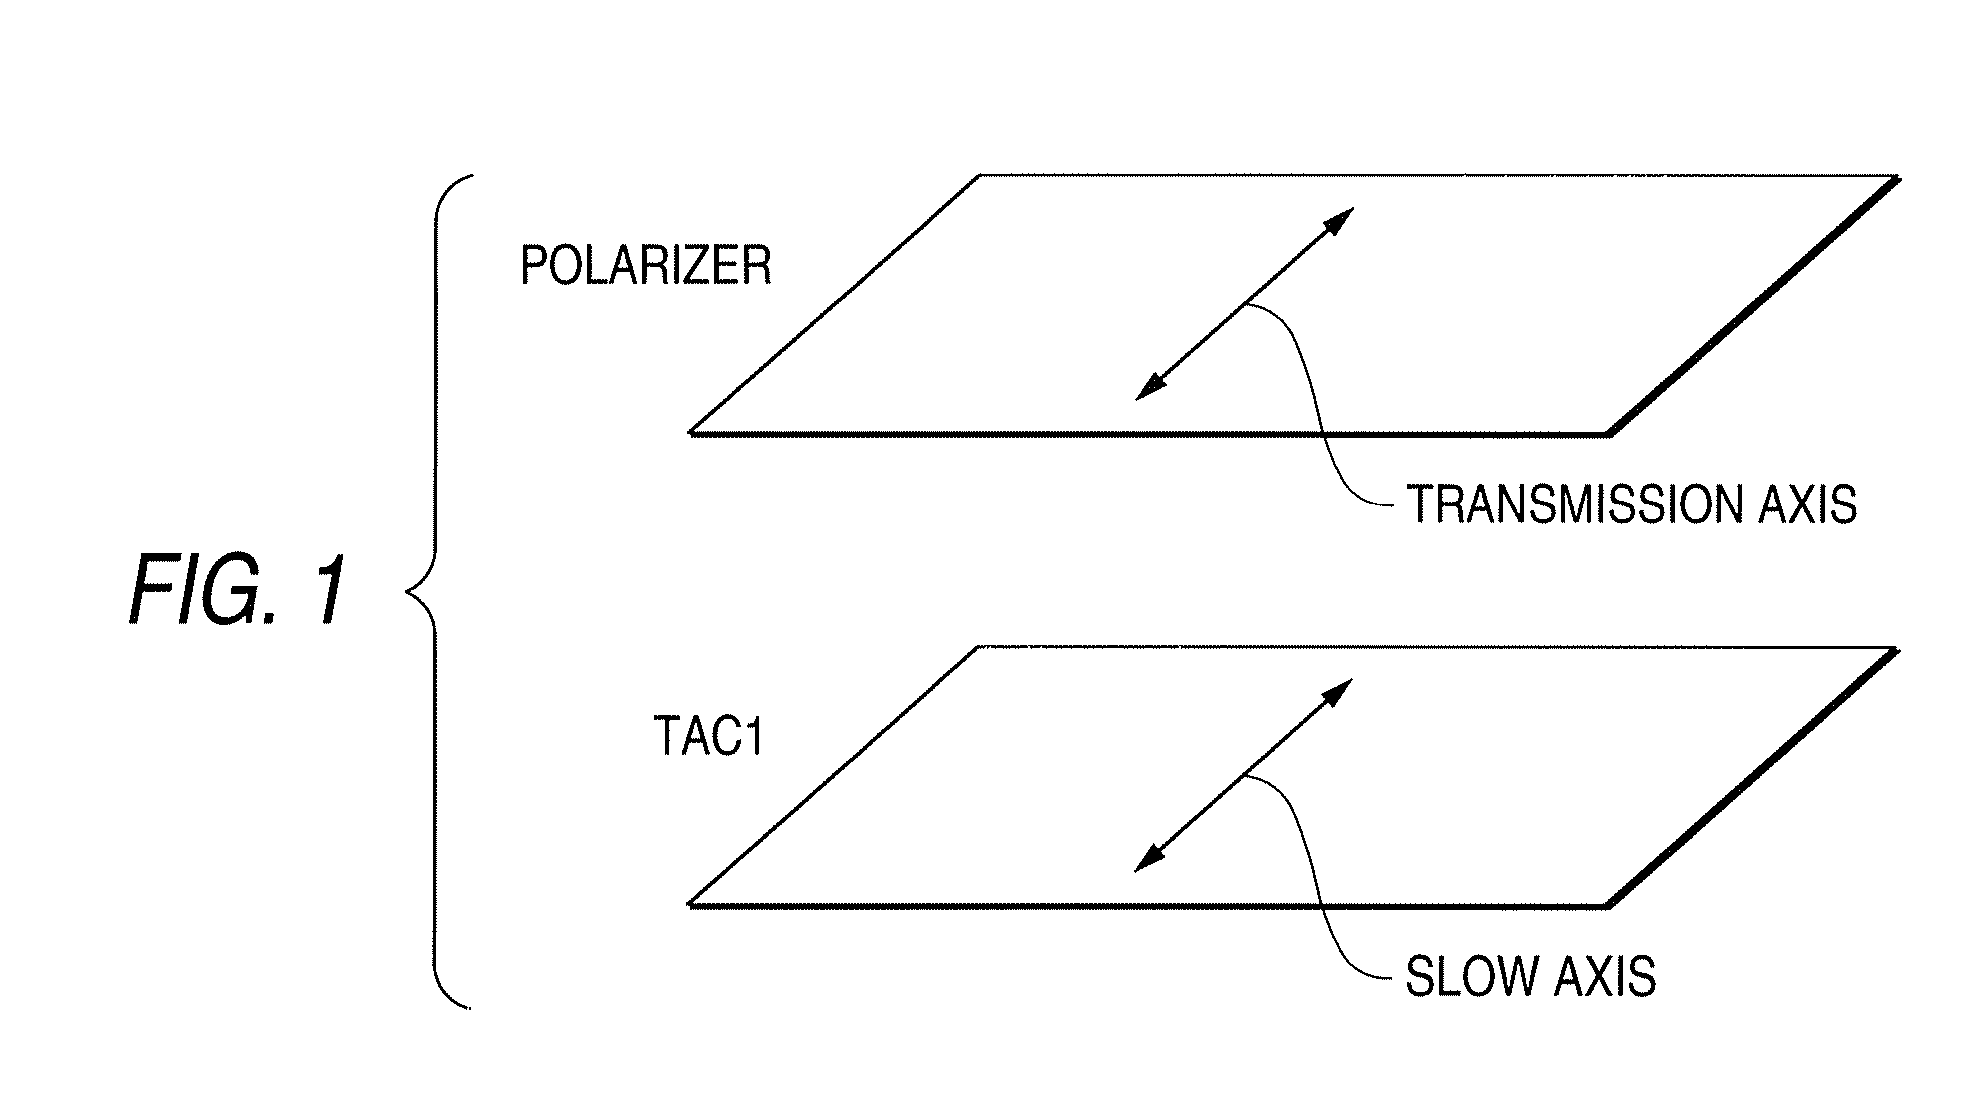 Cellulose Acylate Film, Polarizing Plate and Liquid Crystal Display Device Using the Same